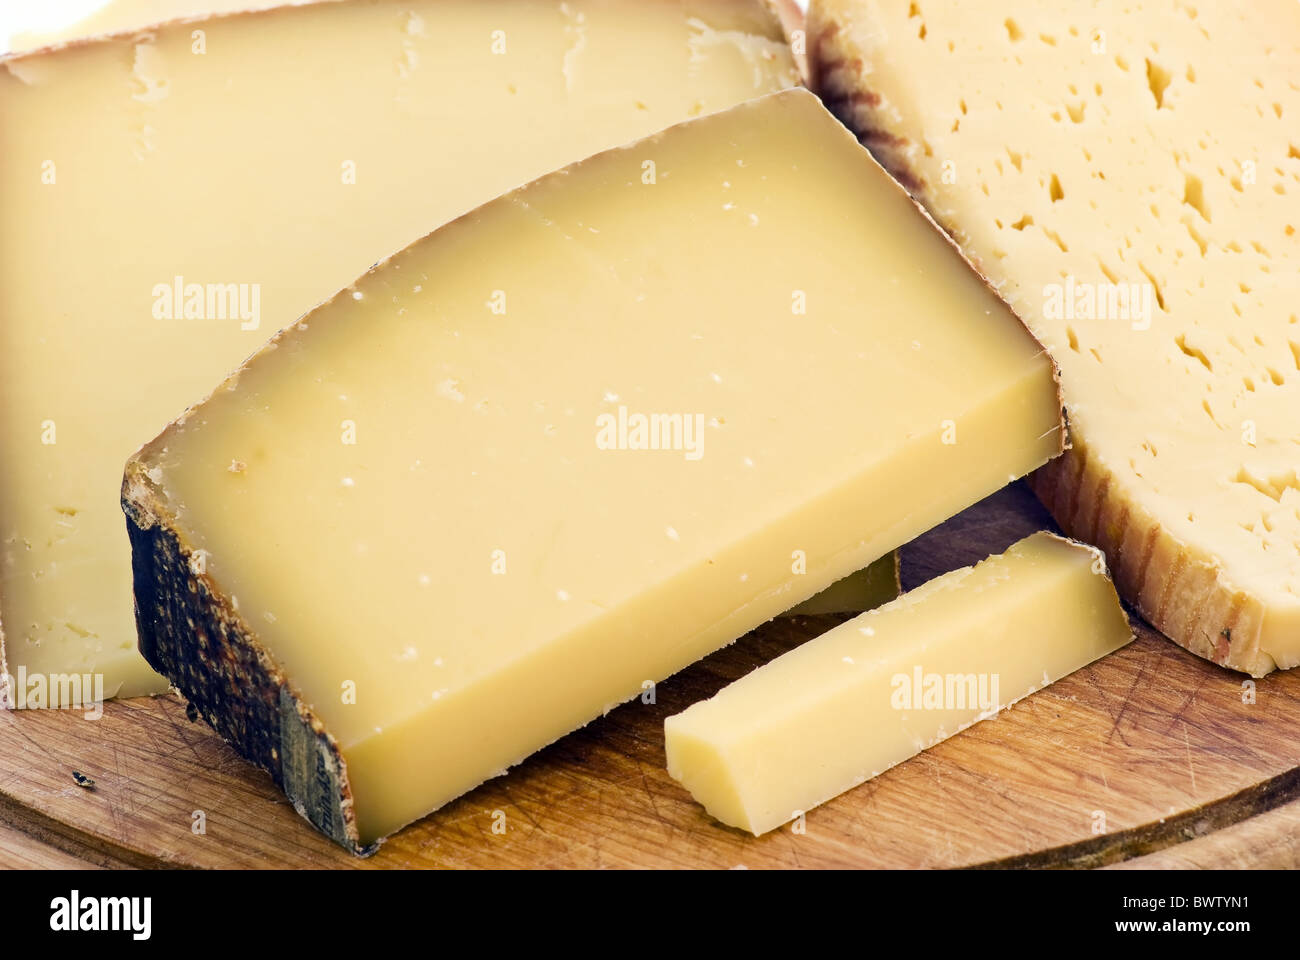 Mountain cheese colletion as closeup on a chopping board Stock Photo